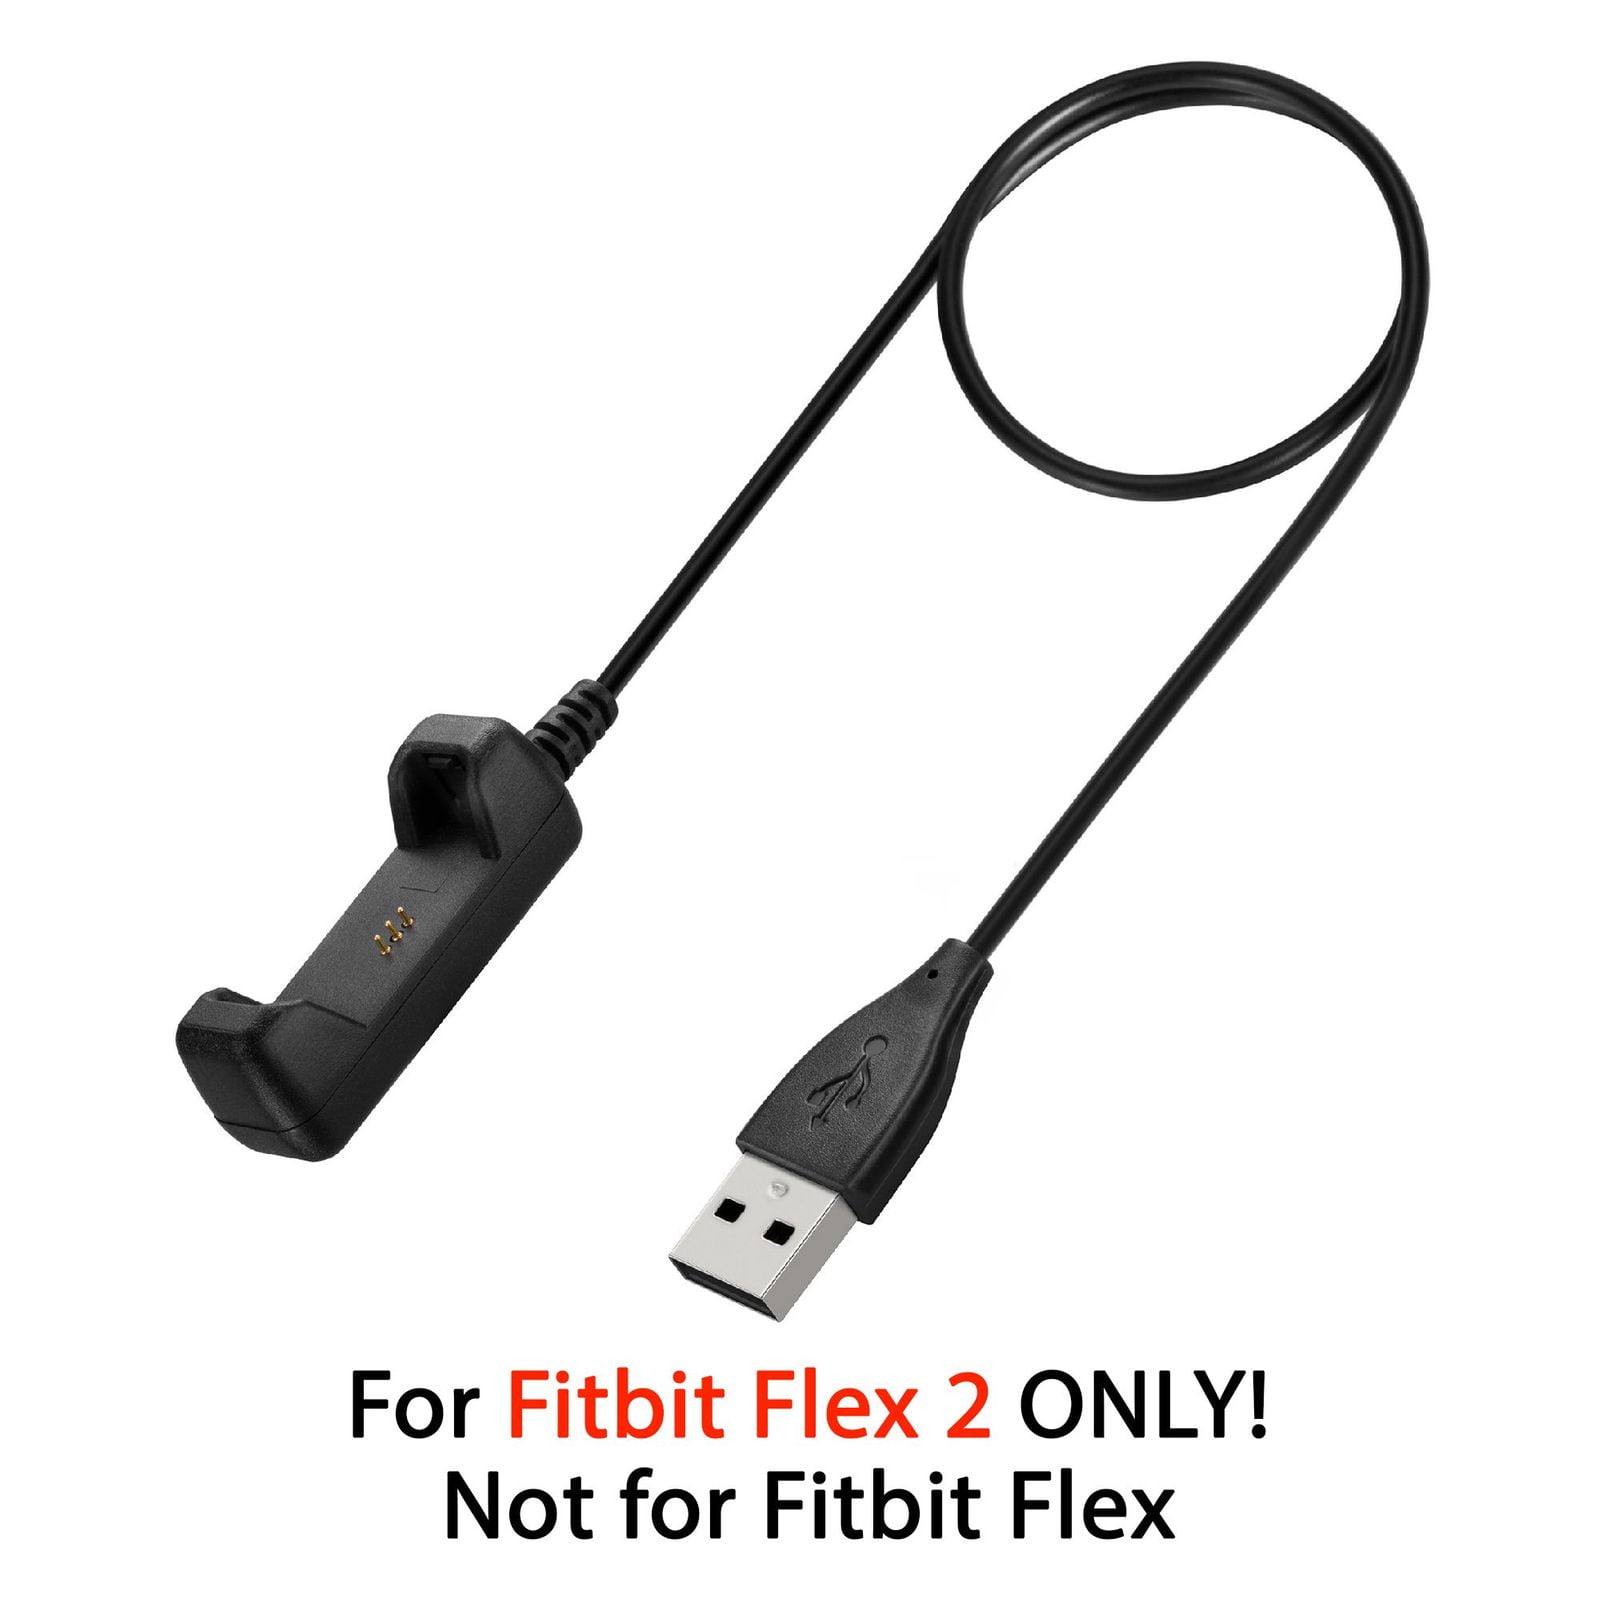 GENUINE Fitbit Flex 2 USB Charging Cable LOT of 2 Black 